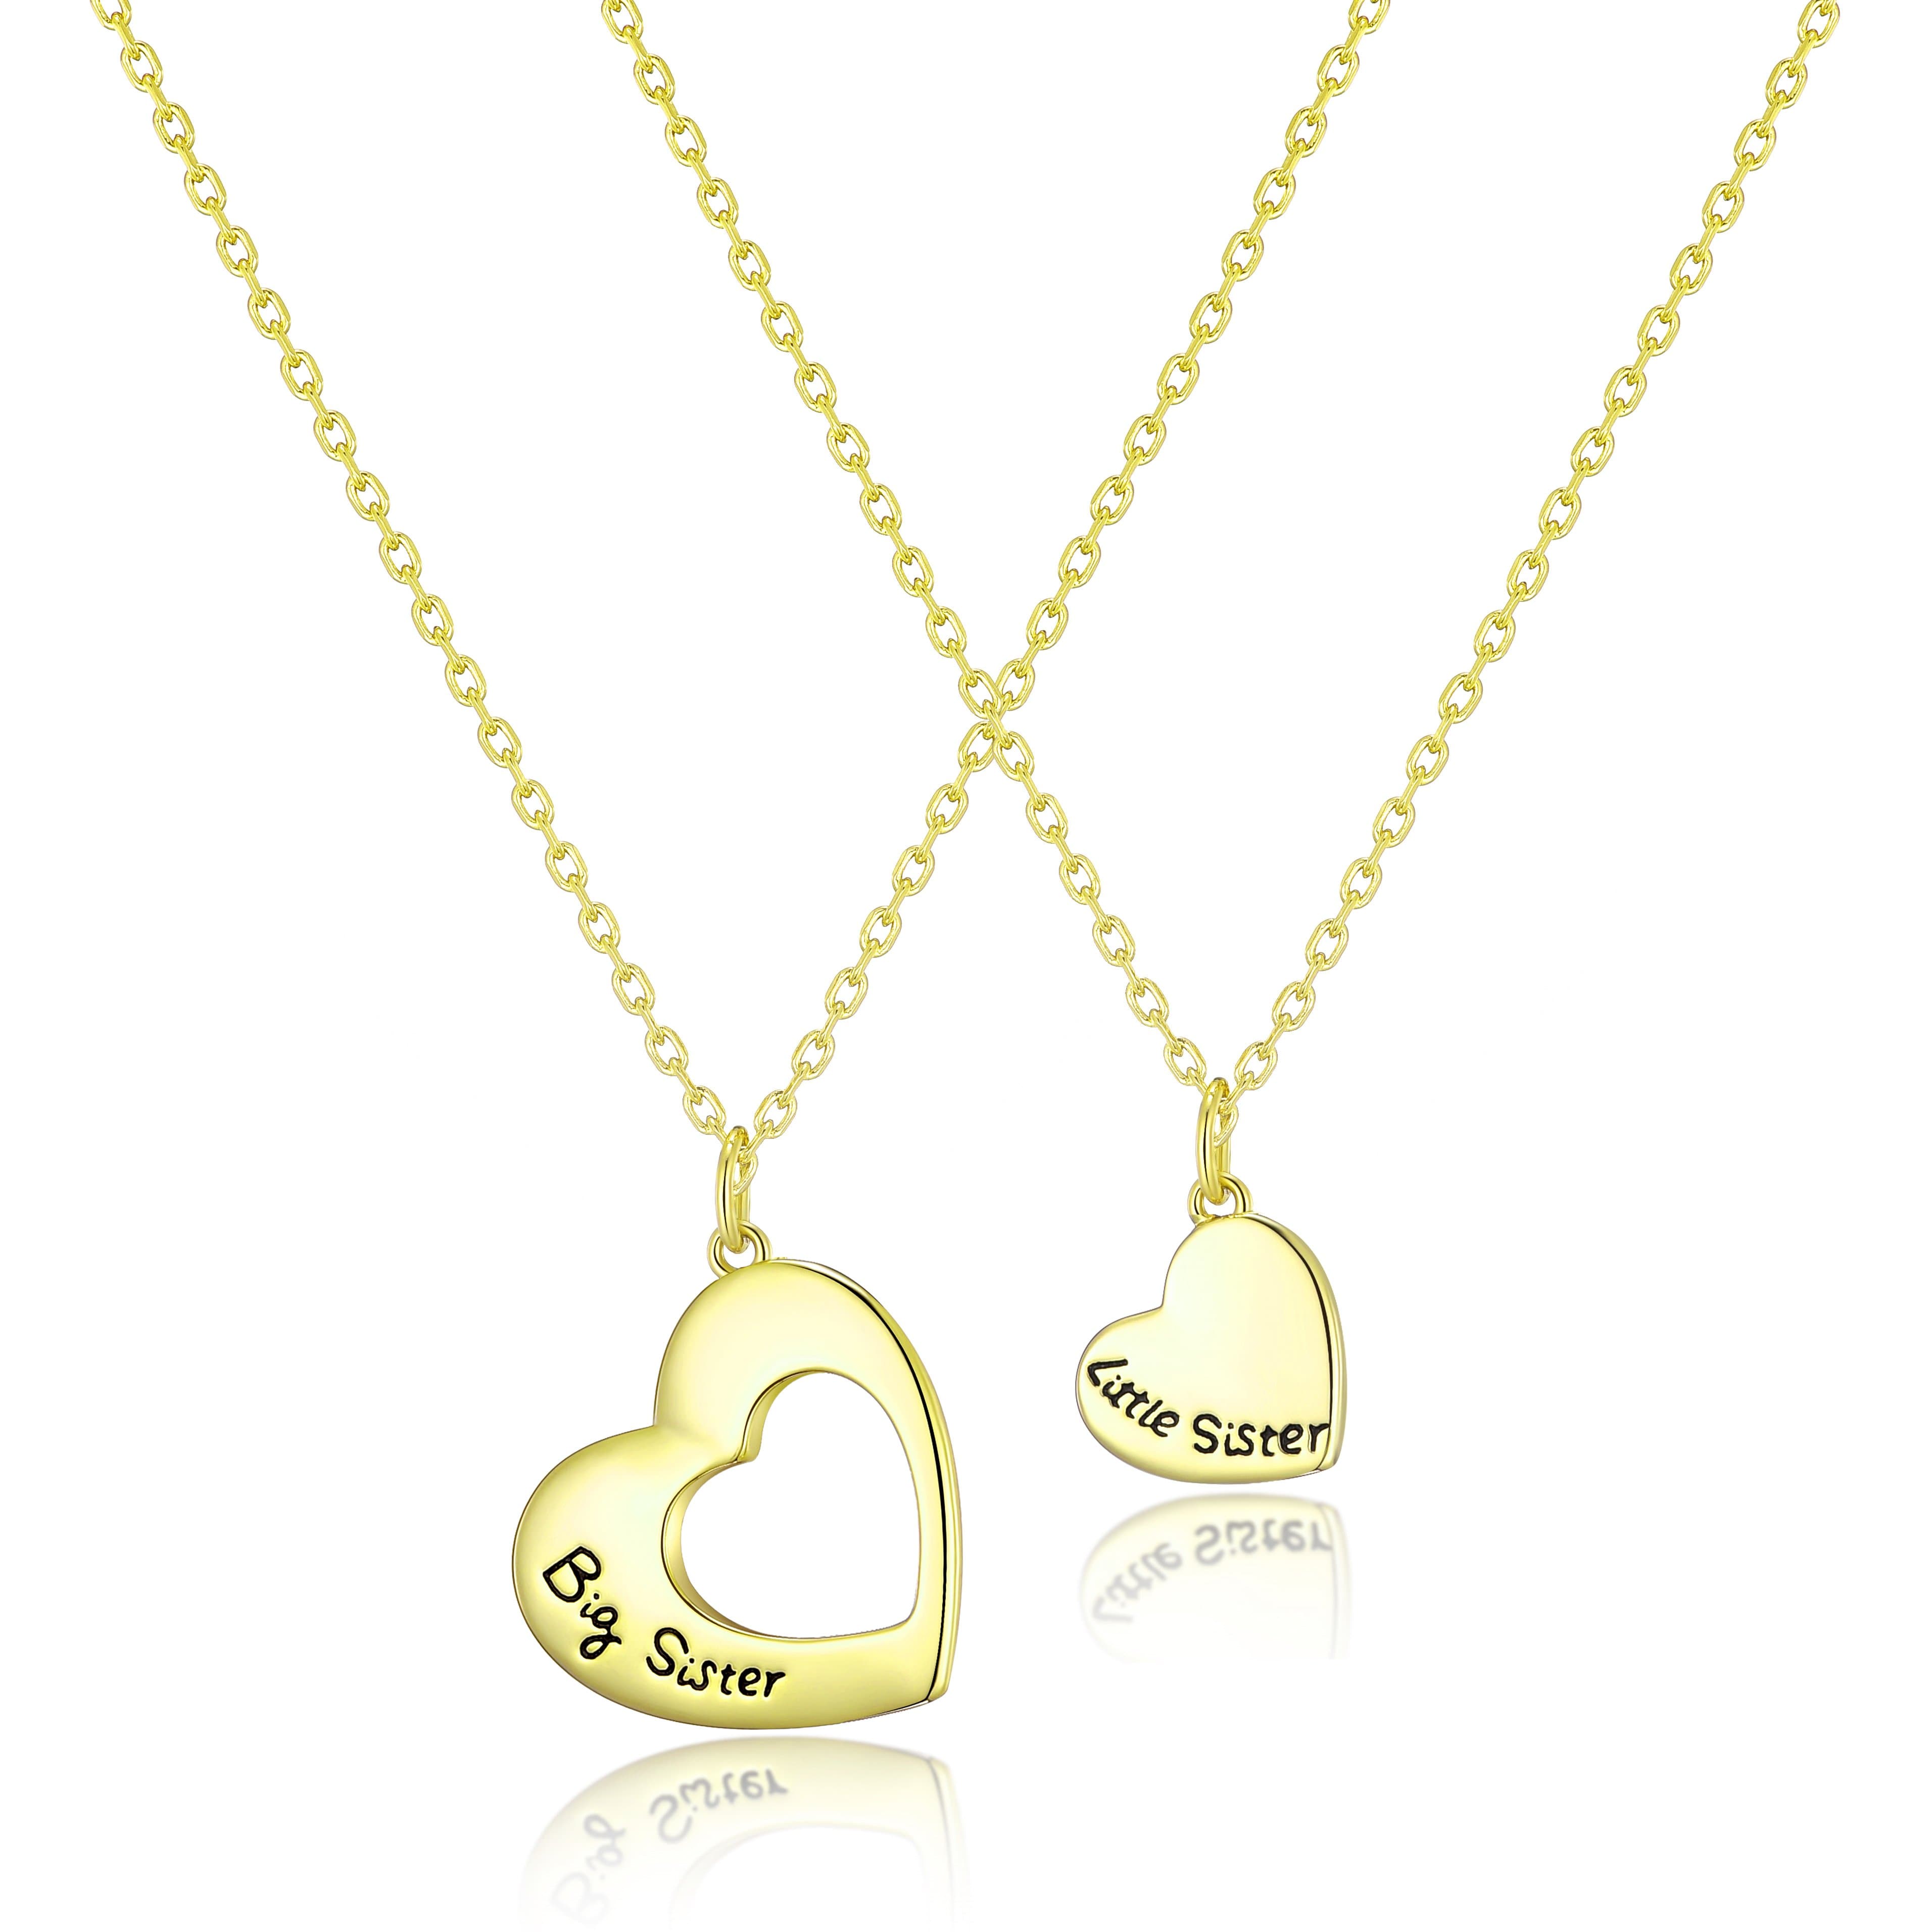 Gold Plated Big Sister and Little Sister Necklace Set by Philip Jones Jewellery